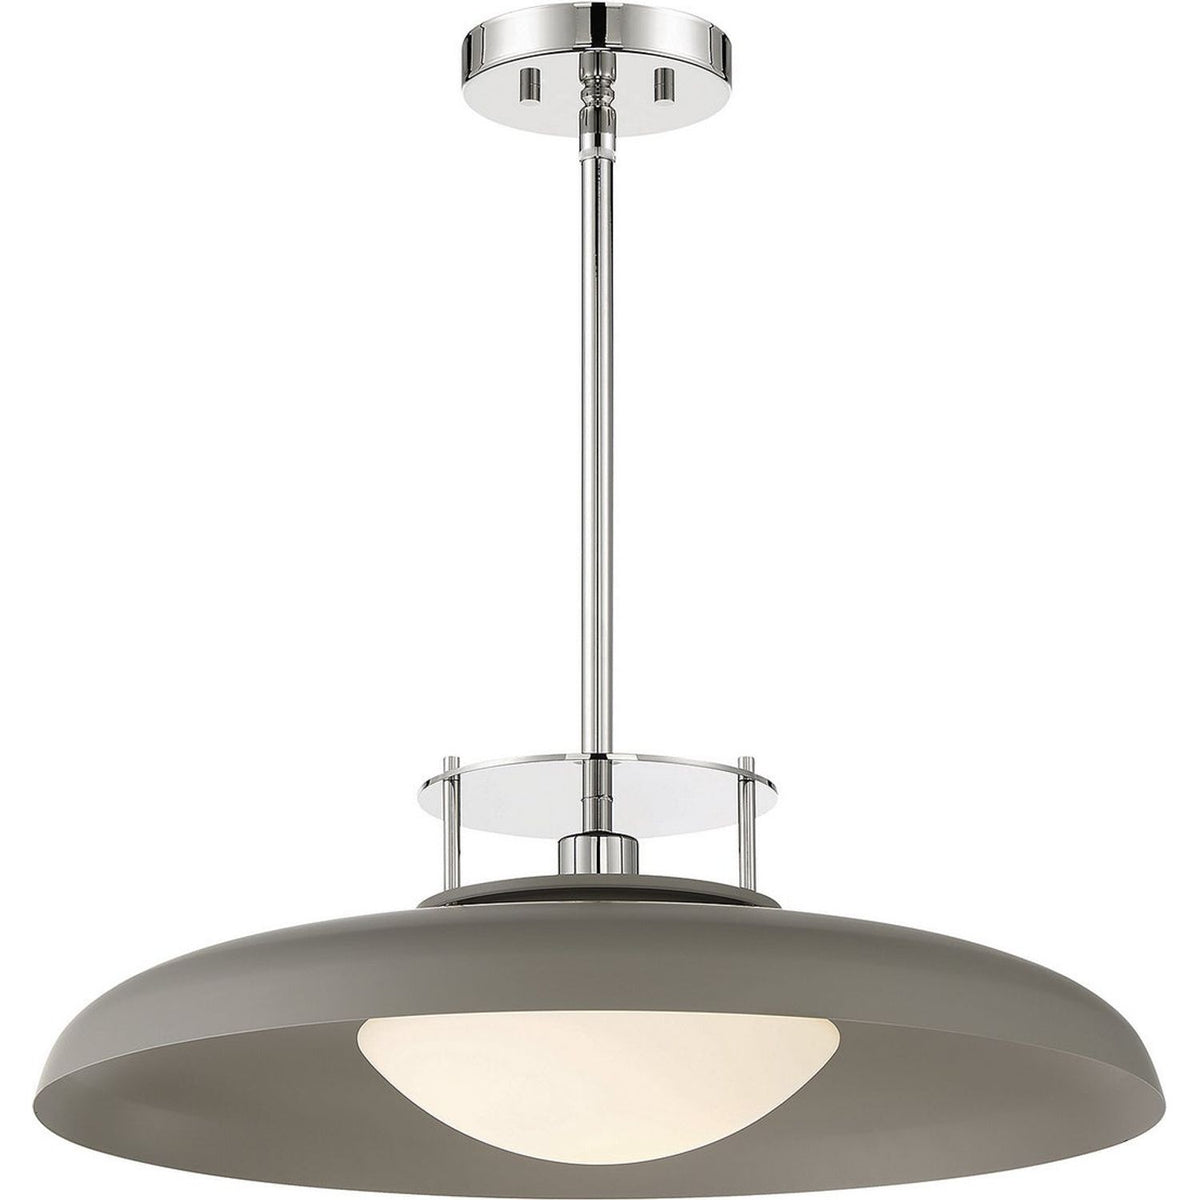 Savoy House - 7-1690-1-175 - One Light Pendant - Gavin - Gray with Polished Nickel Accents